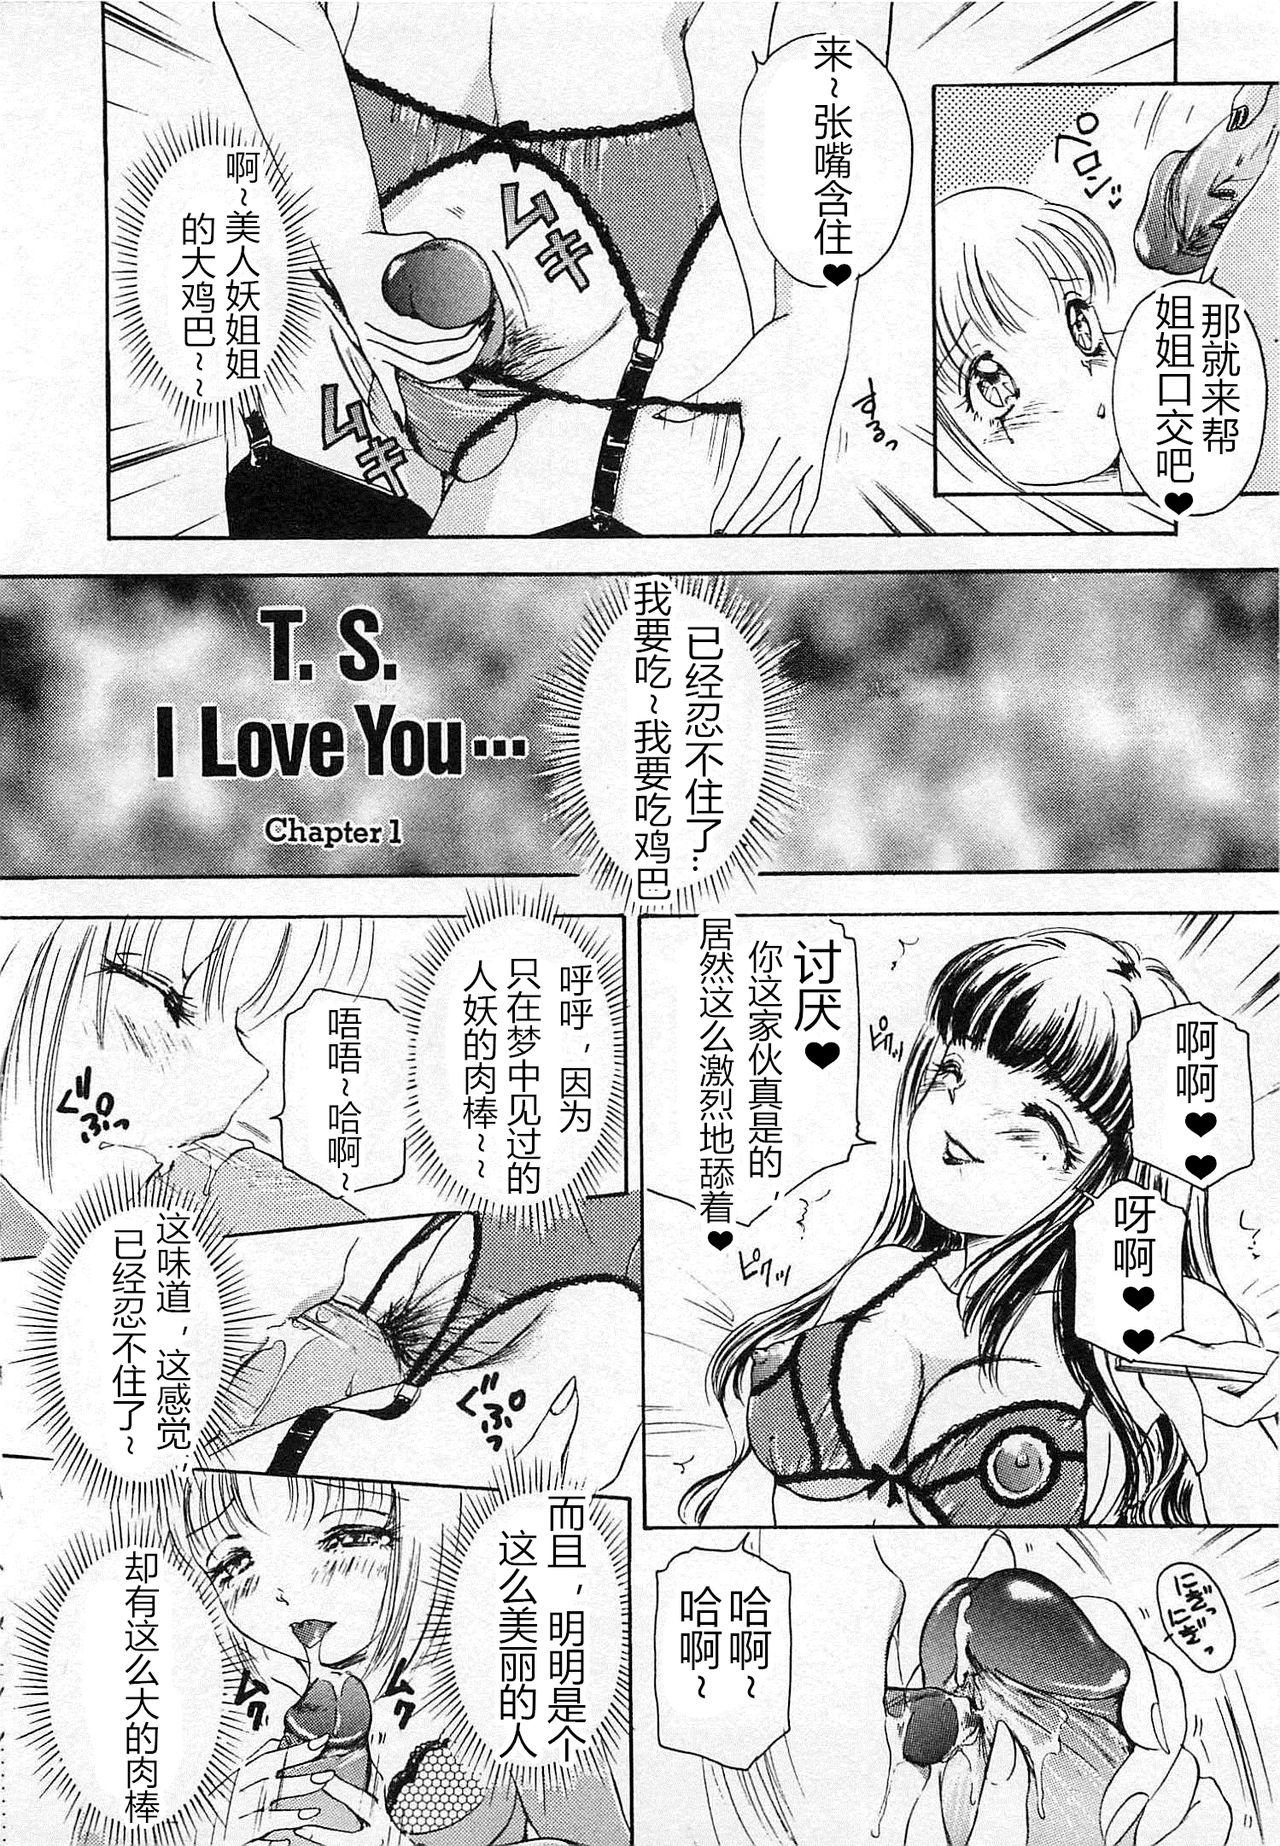 T.S. I LOVE YOU chapter 01 4